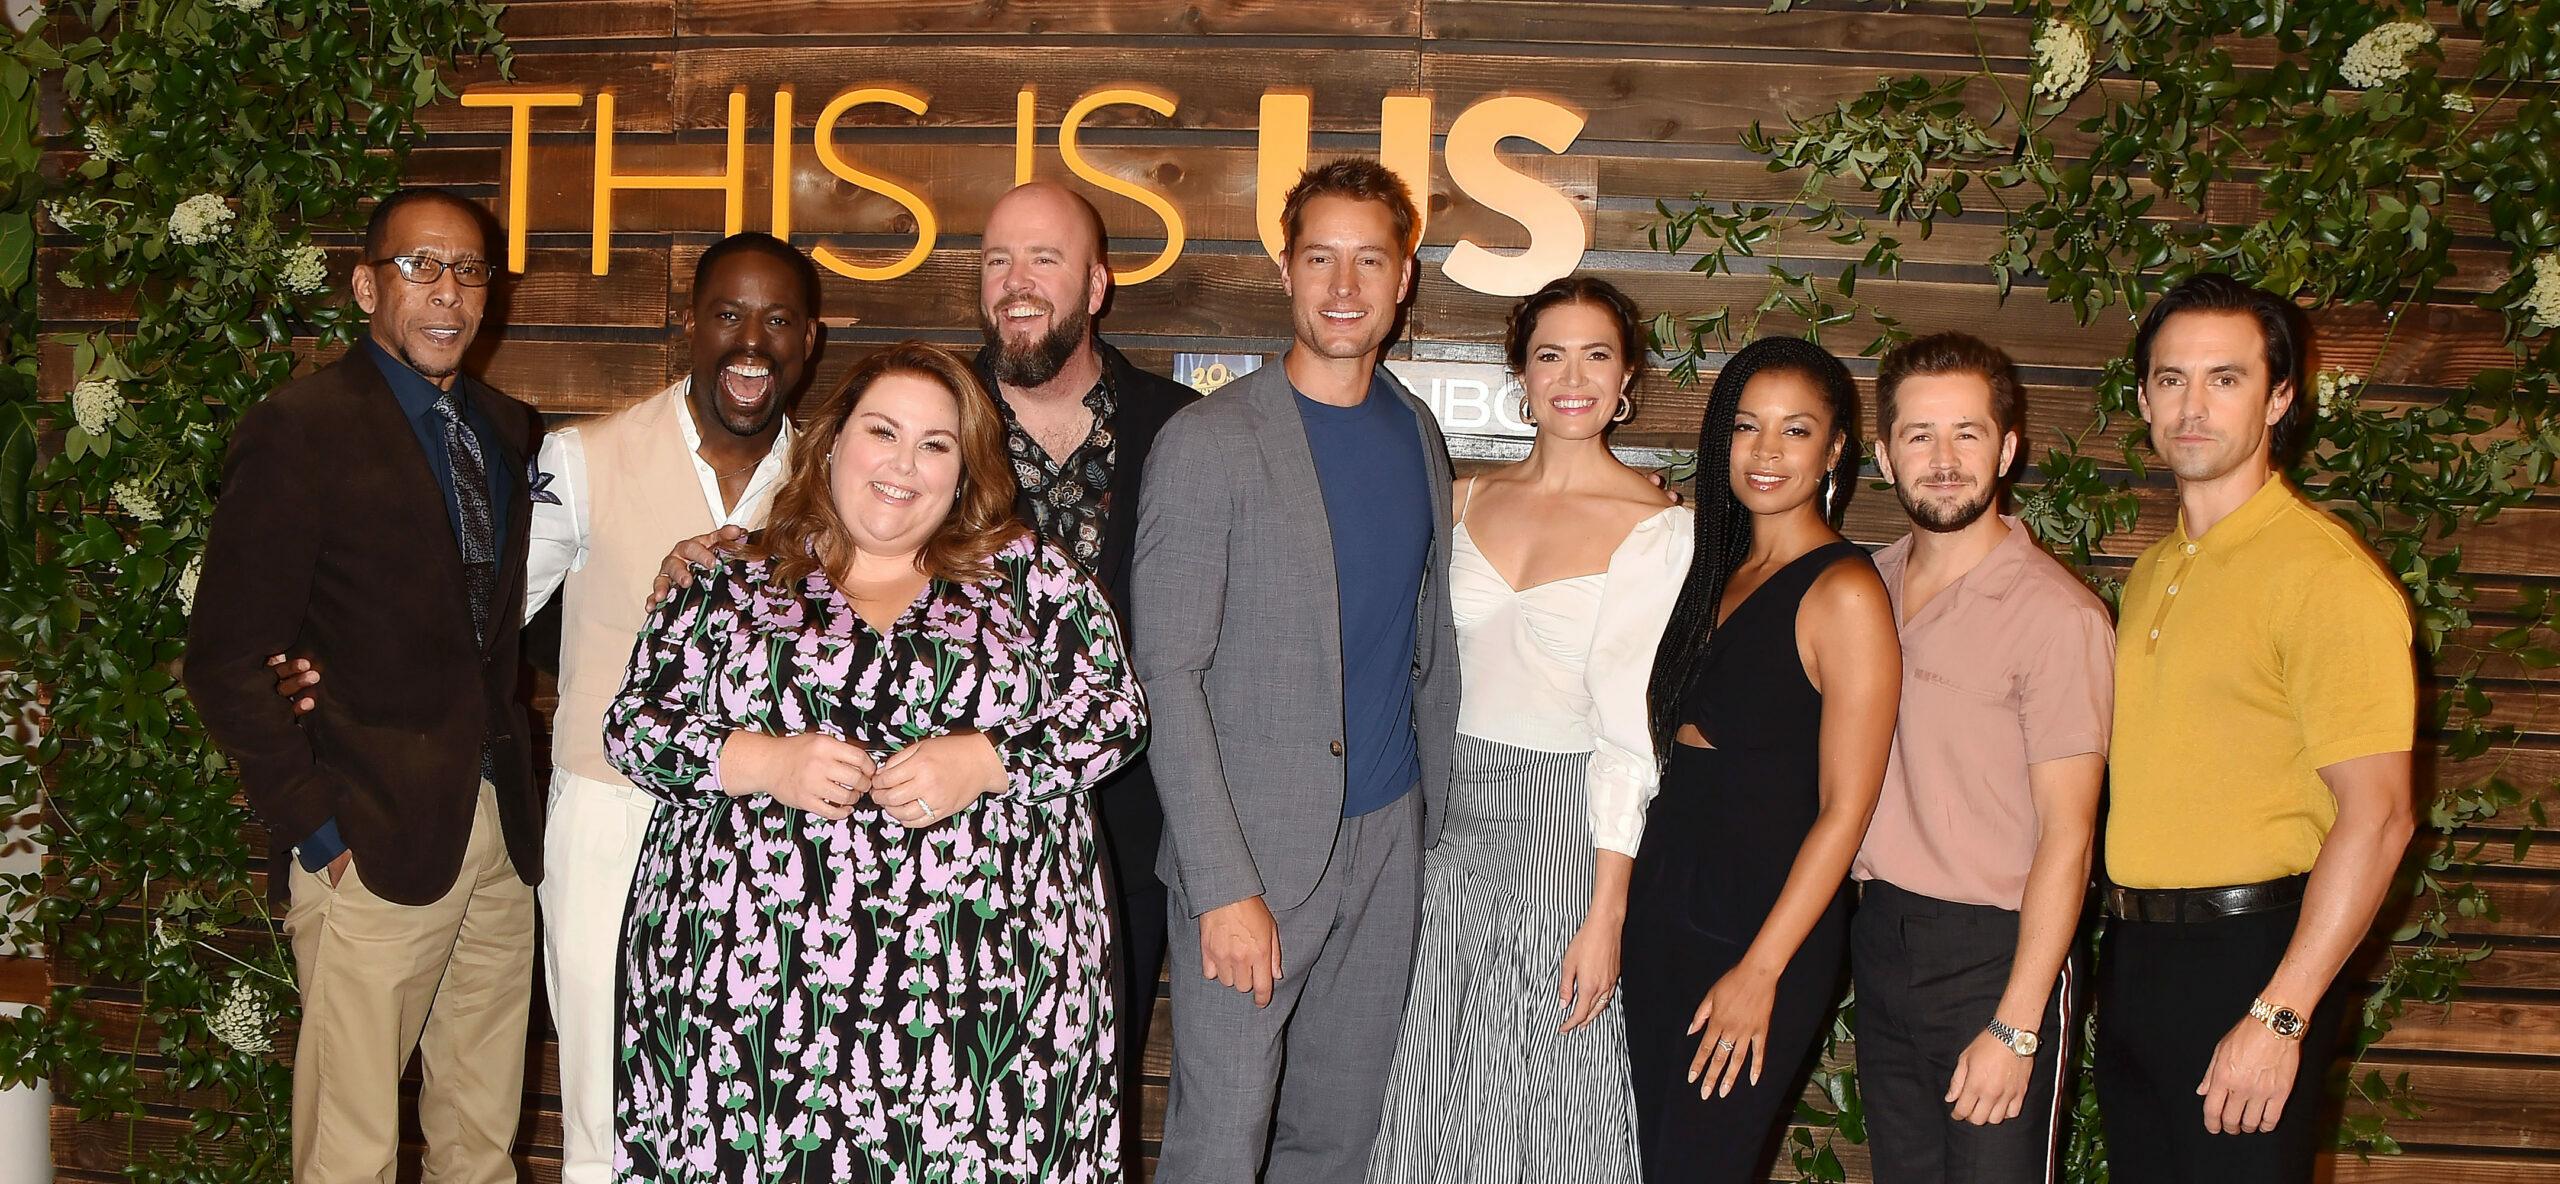 Tonight’s ‘This Is Us’ Series Finale Will Be A Fond Farewell!